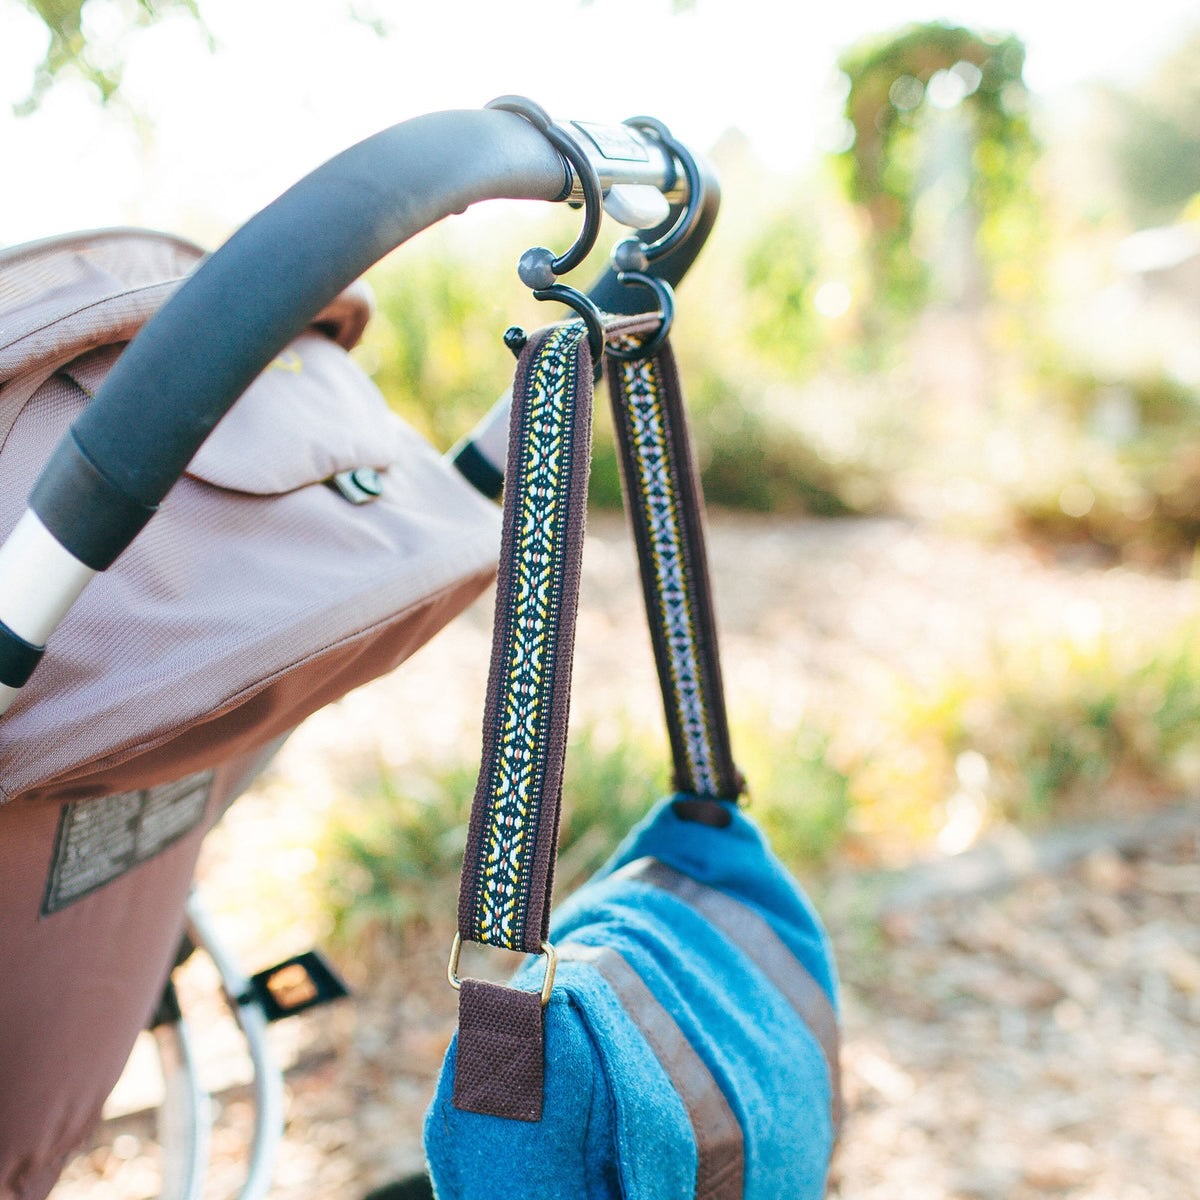 Stroller Hooks Review: Convenient Accessories for On-the-Go Parents